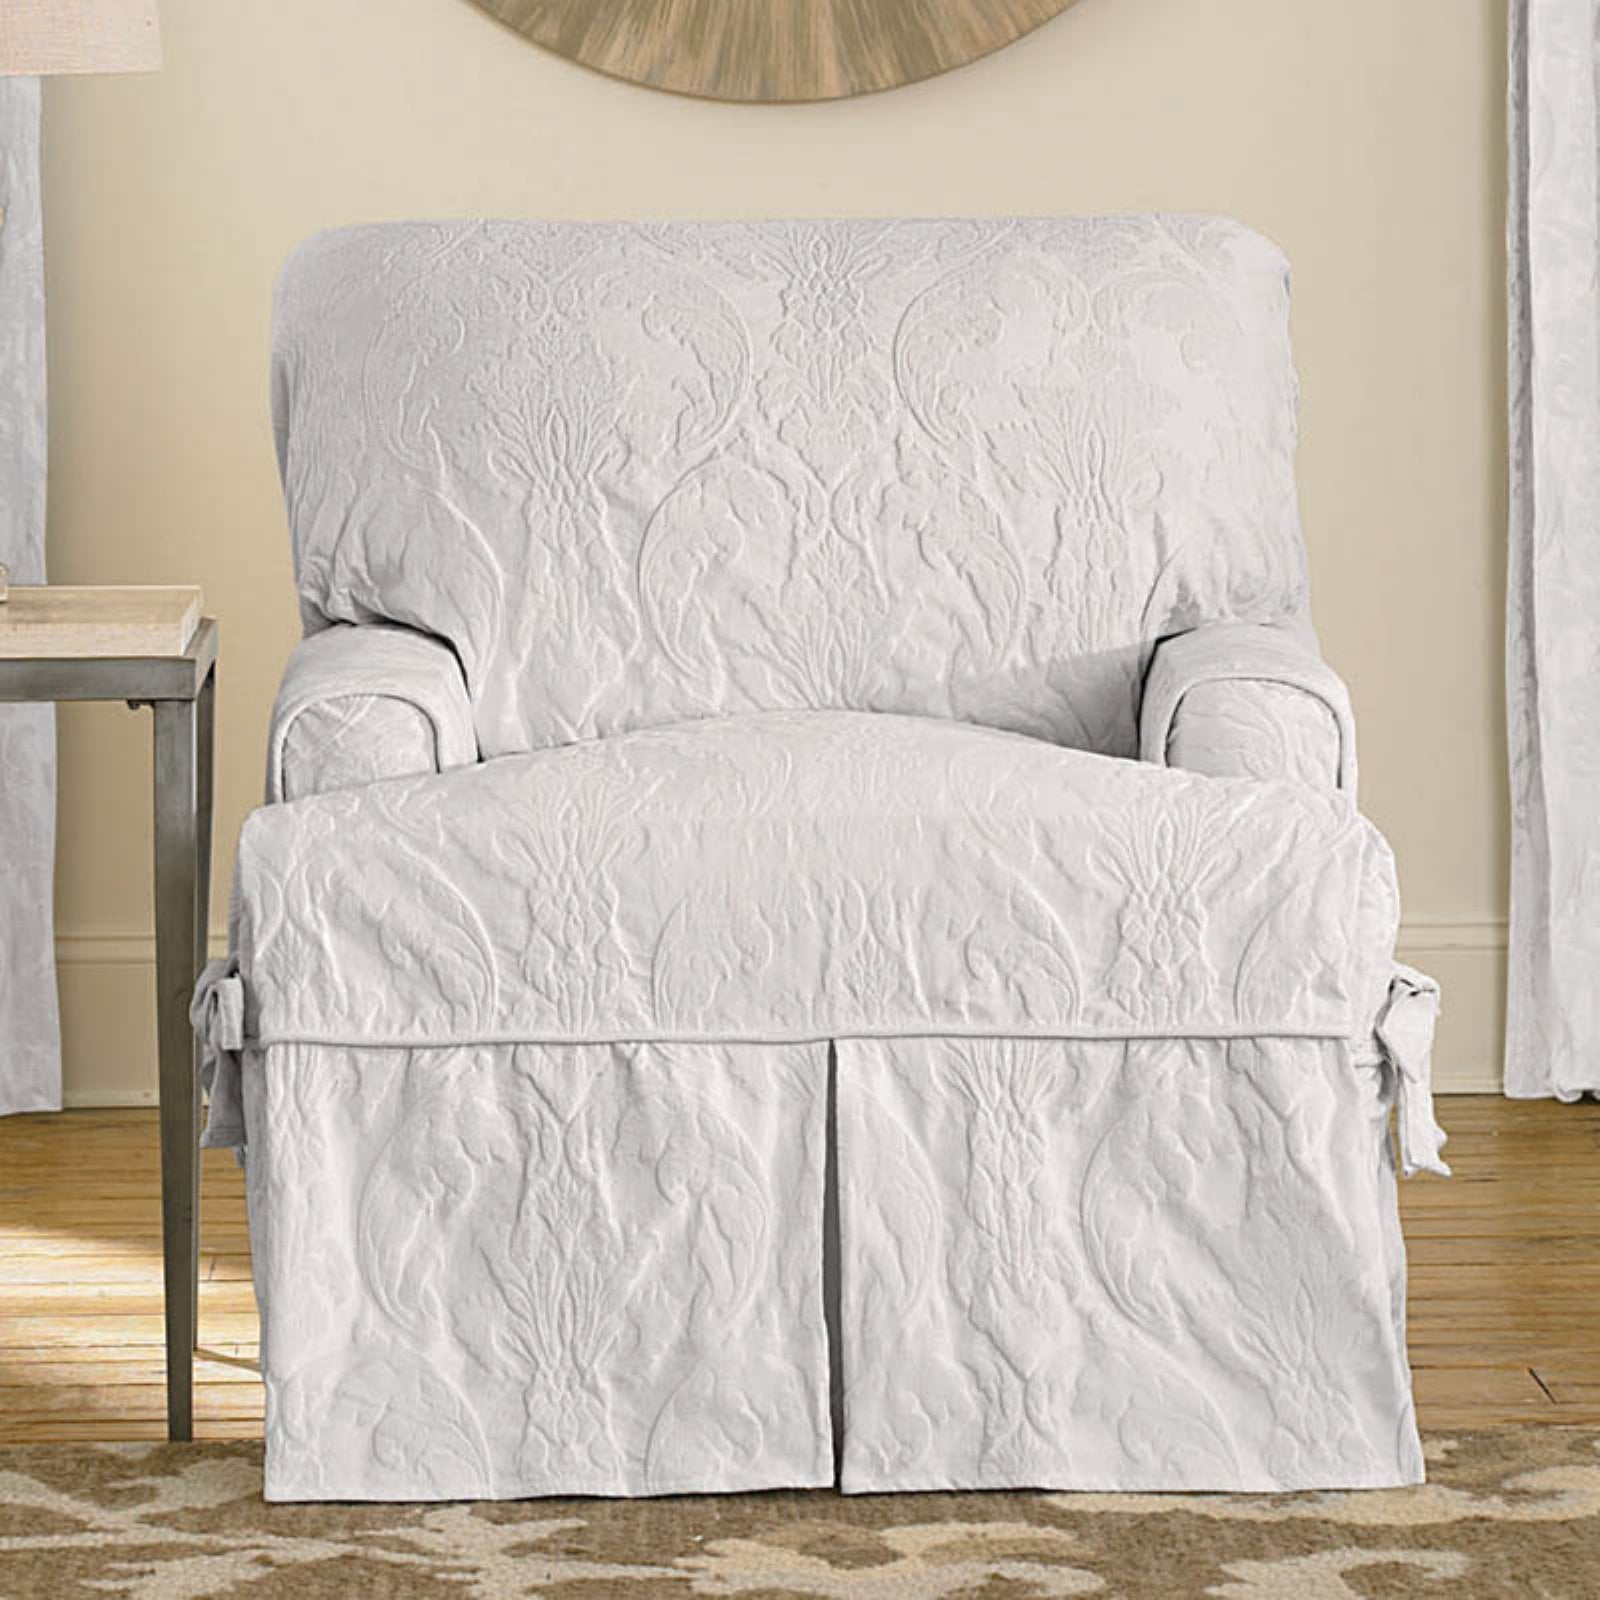 T-Cushion Recliner Slipcover George Oliver Fabric: Sage 100% Polyester